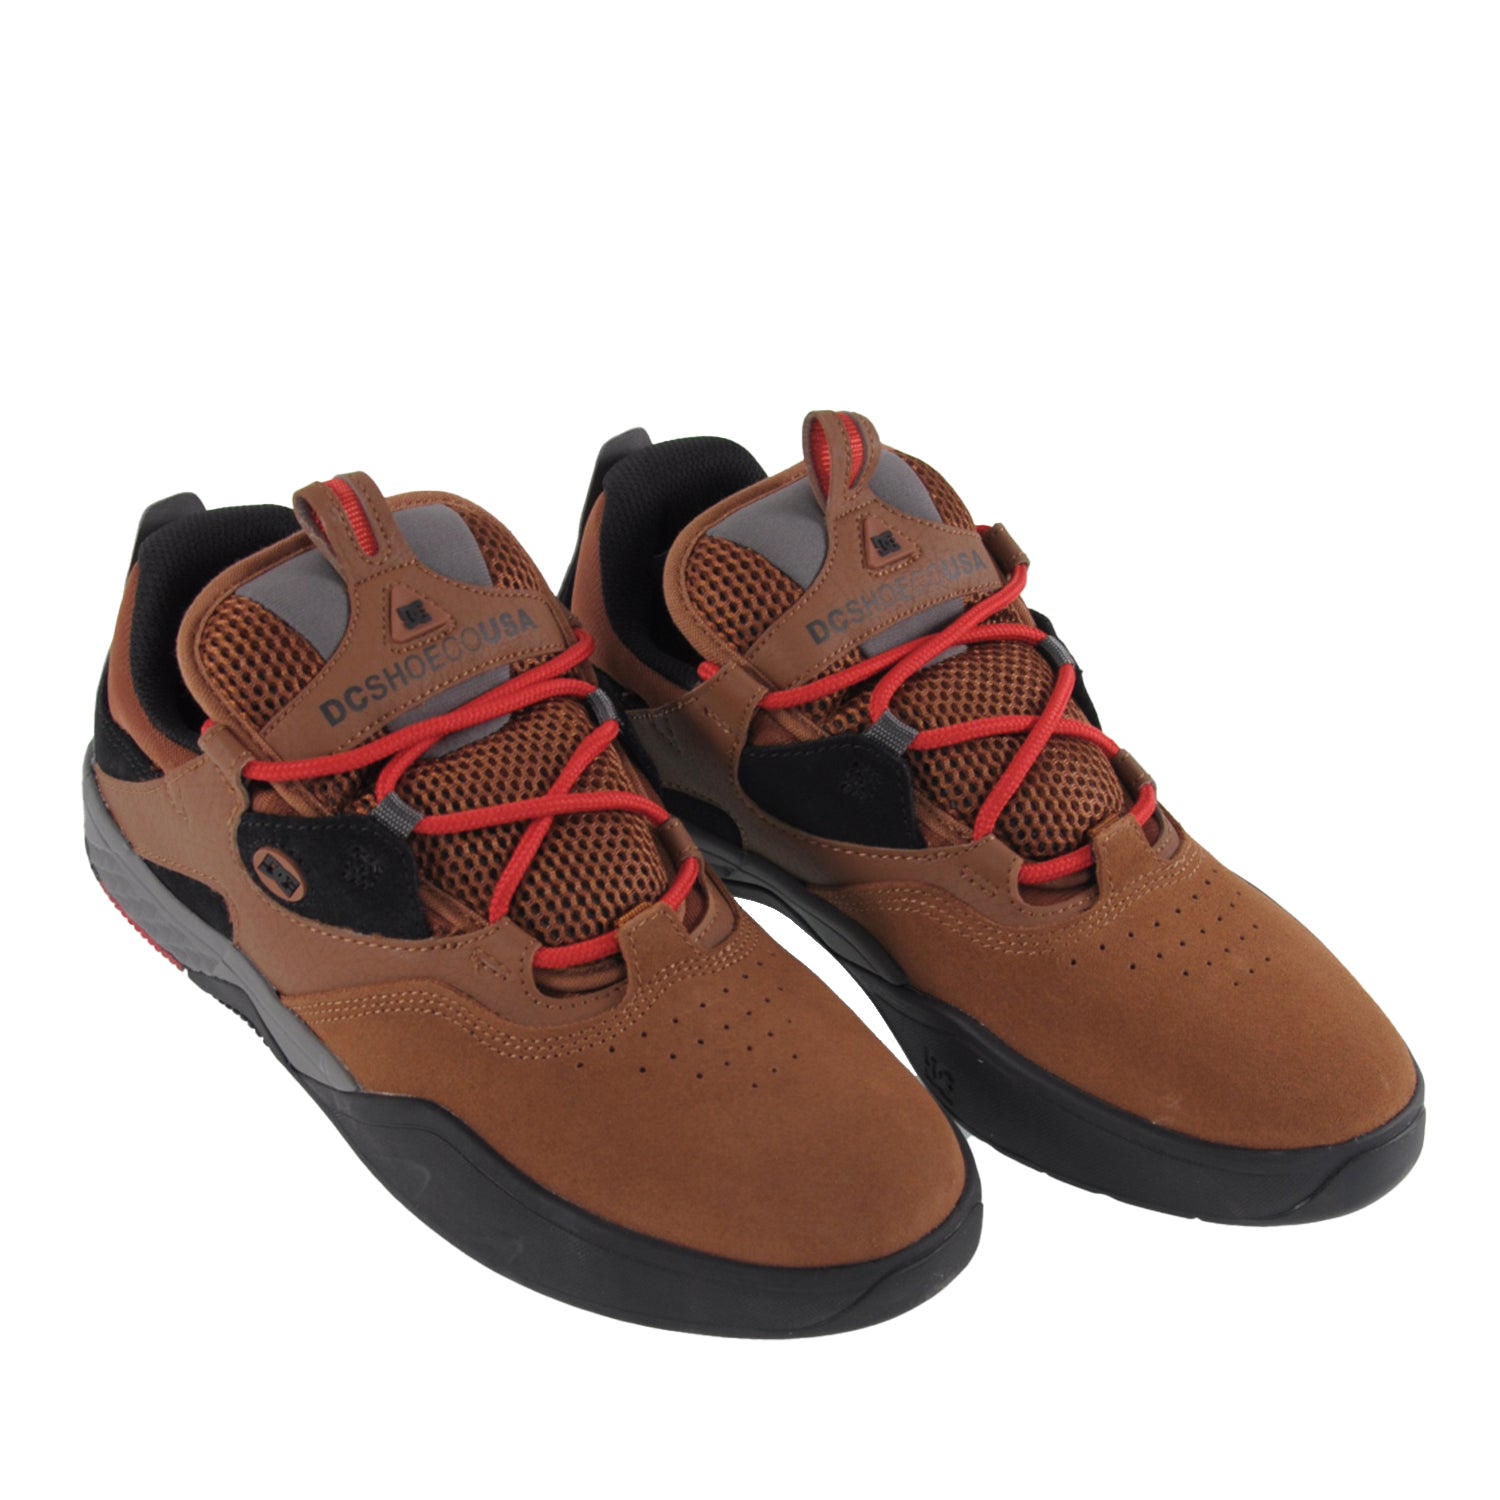 DC Shoes Kalis Skate Shoes - Brown / Black / Red - Prime Delux Store